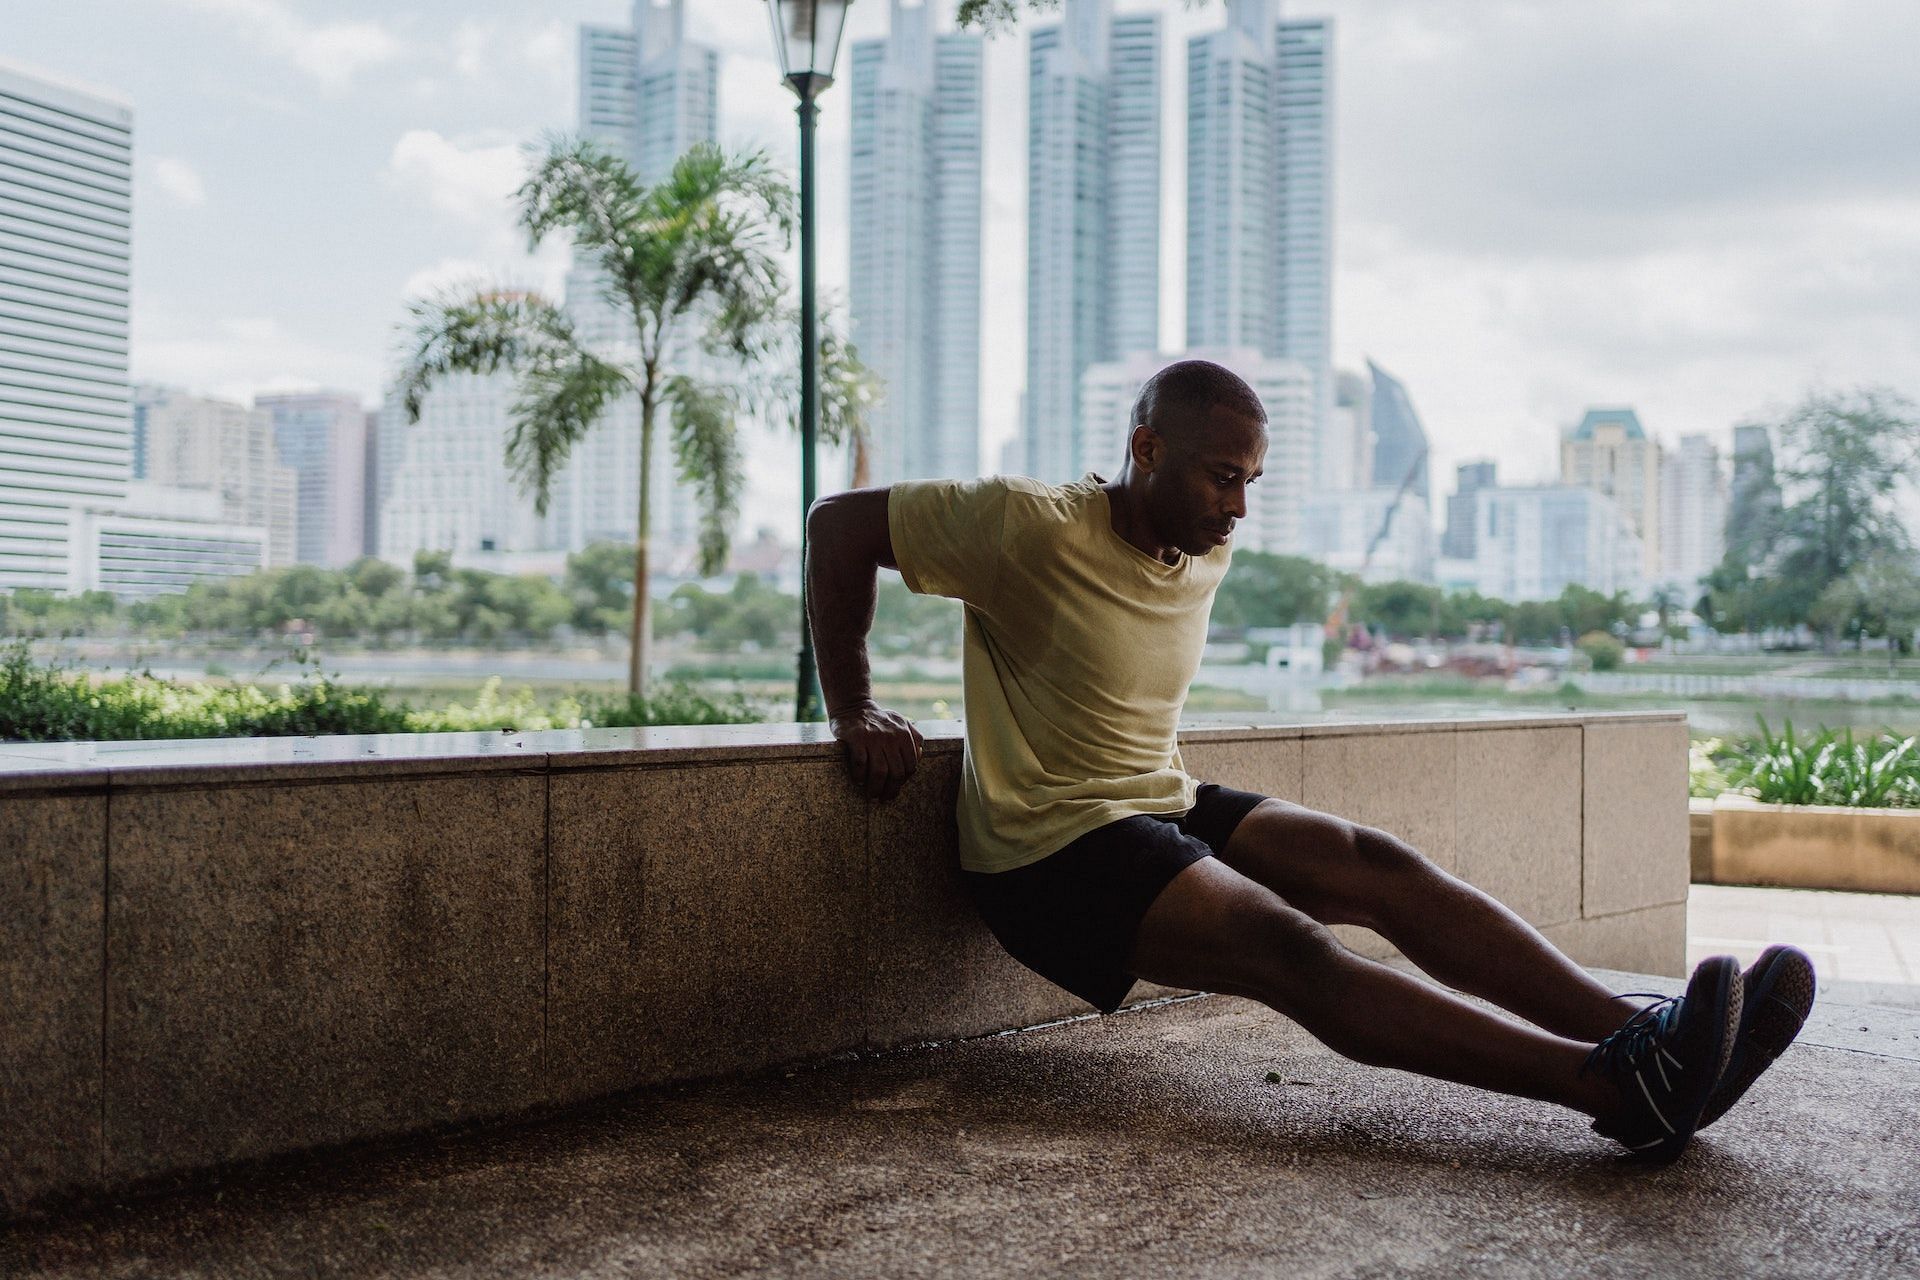 Dips exercise are an effective bodyweight exercise. (Photo via Pexels/Ketut Subiyanto)